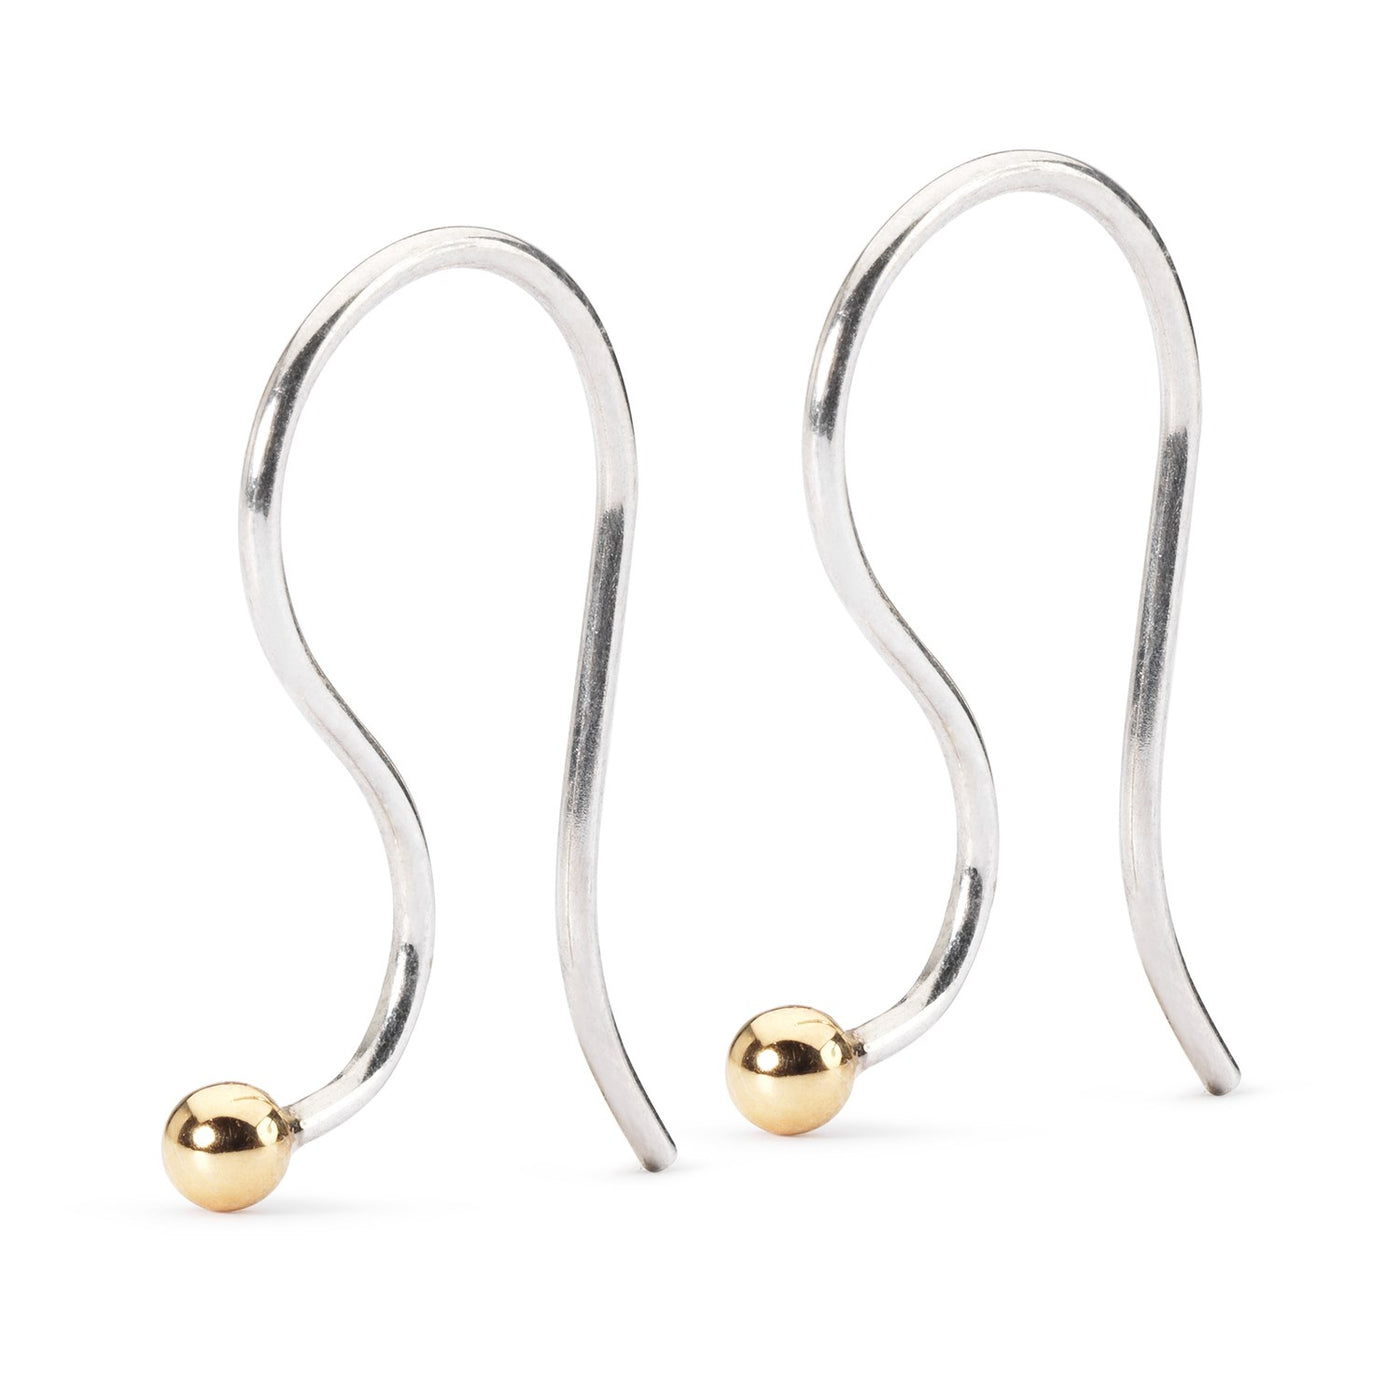 Silver and Gold Earring Hooks, featuring a set of two hooks made of silver and 18 karat gold, perfect for creating a stylish look.